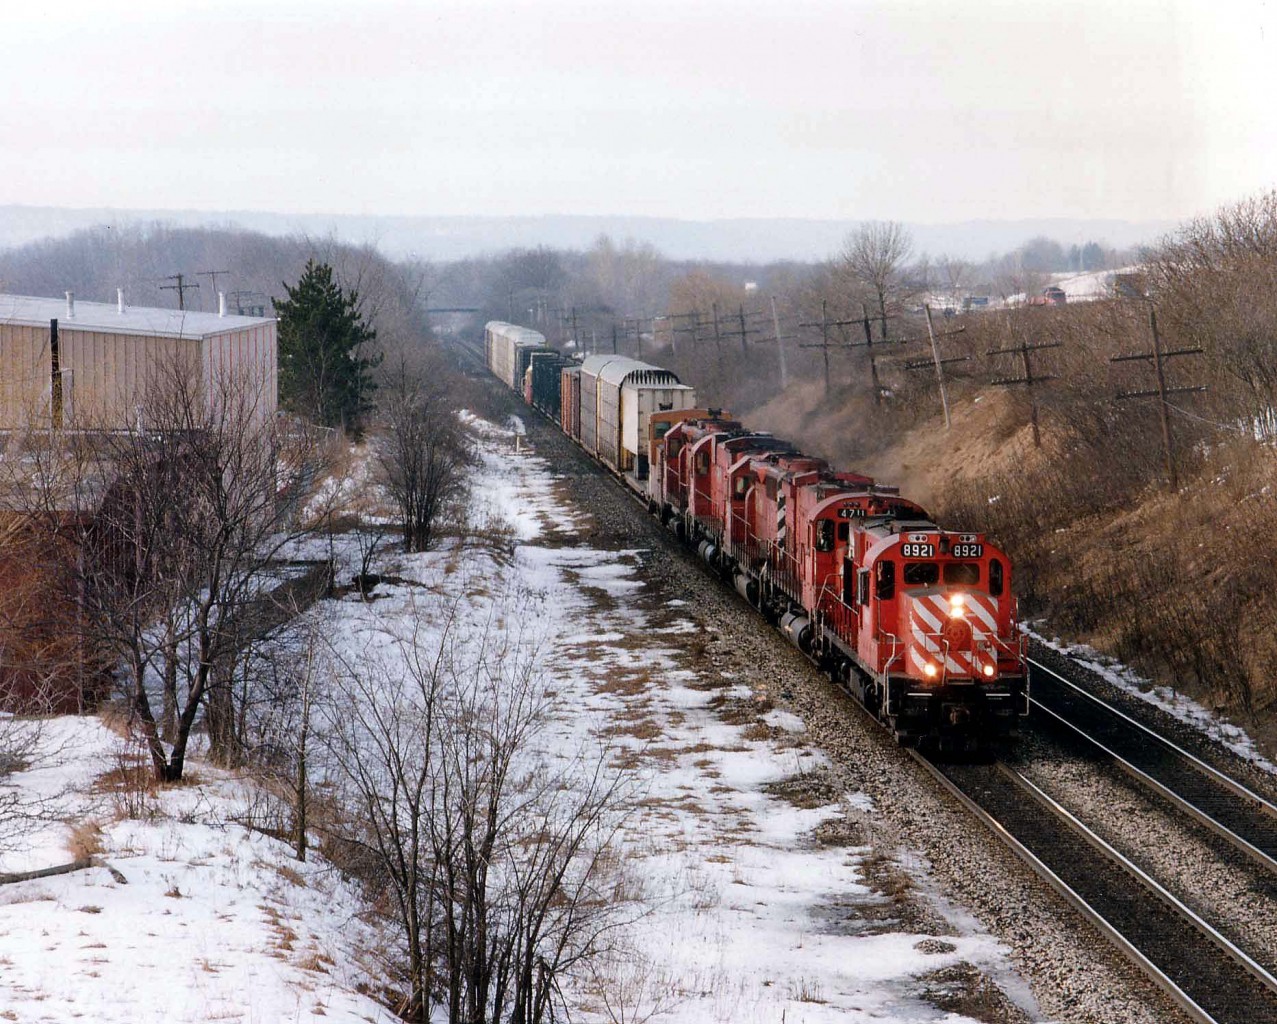 A very overpowered and short CP #557 on February 5, 1993 was eagerly awaited by the local railfan population. No wonder!!  It featured one-of-a-kind CP 8921 (RSD-17)followed by 4711 (M-636 converted to caterpillar engine in 1988)SD40-2 5601 (ret'd 2002), CP 4743 (another Big M) and SD40 5547 (ret'd by 2004) and maybe a dozen cars in tow. This image was taken on a rather warm morning for dead of winter, ground fog obvious from the Lemonville Rd bridge over the CN in Aldershot,ON.